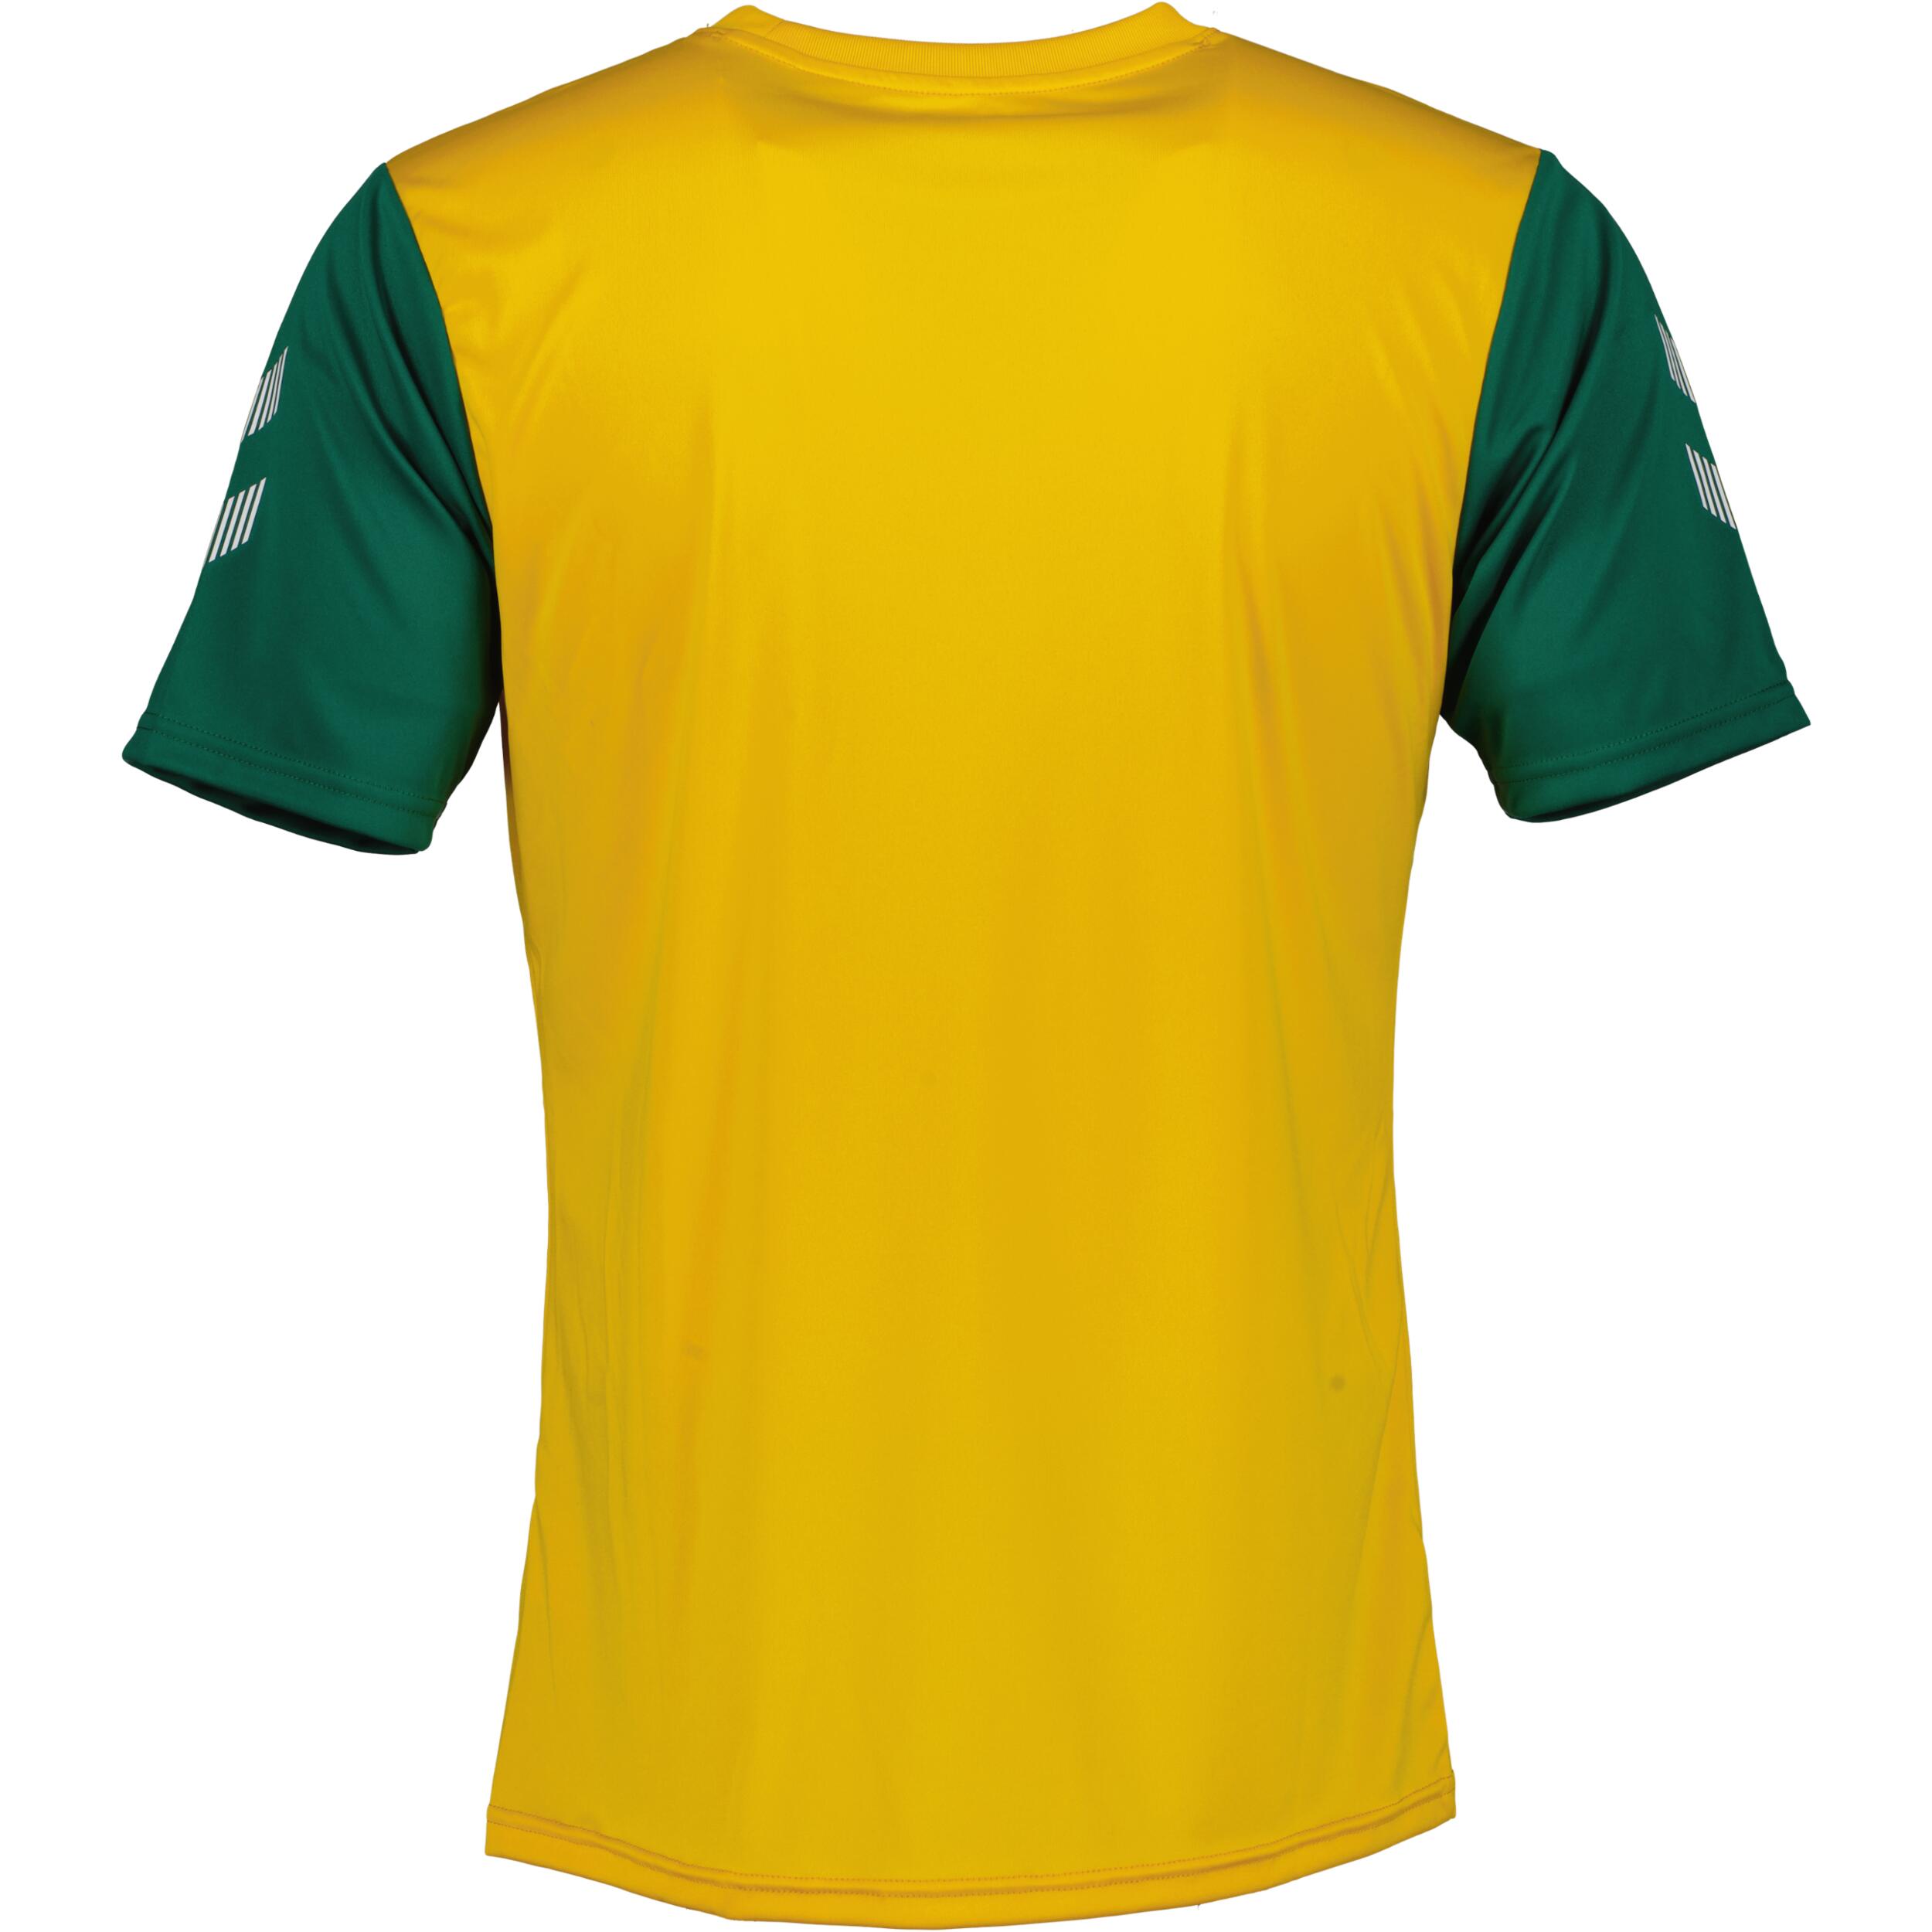 Match jersey for men, great for football, in yellow/evergreen 2/3